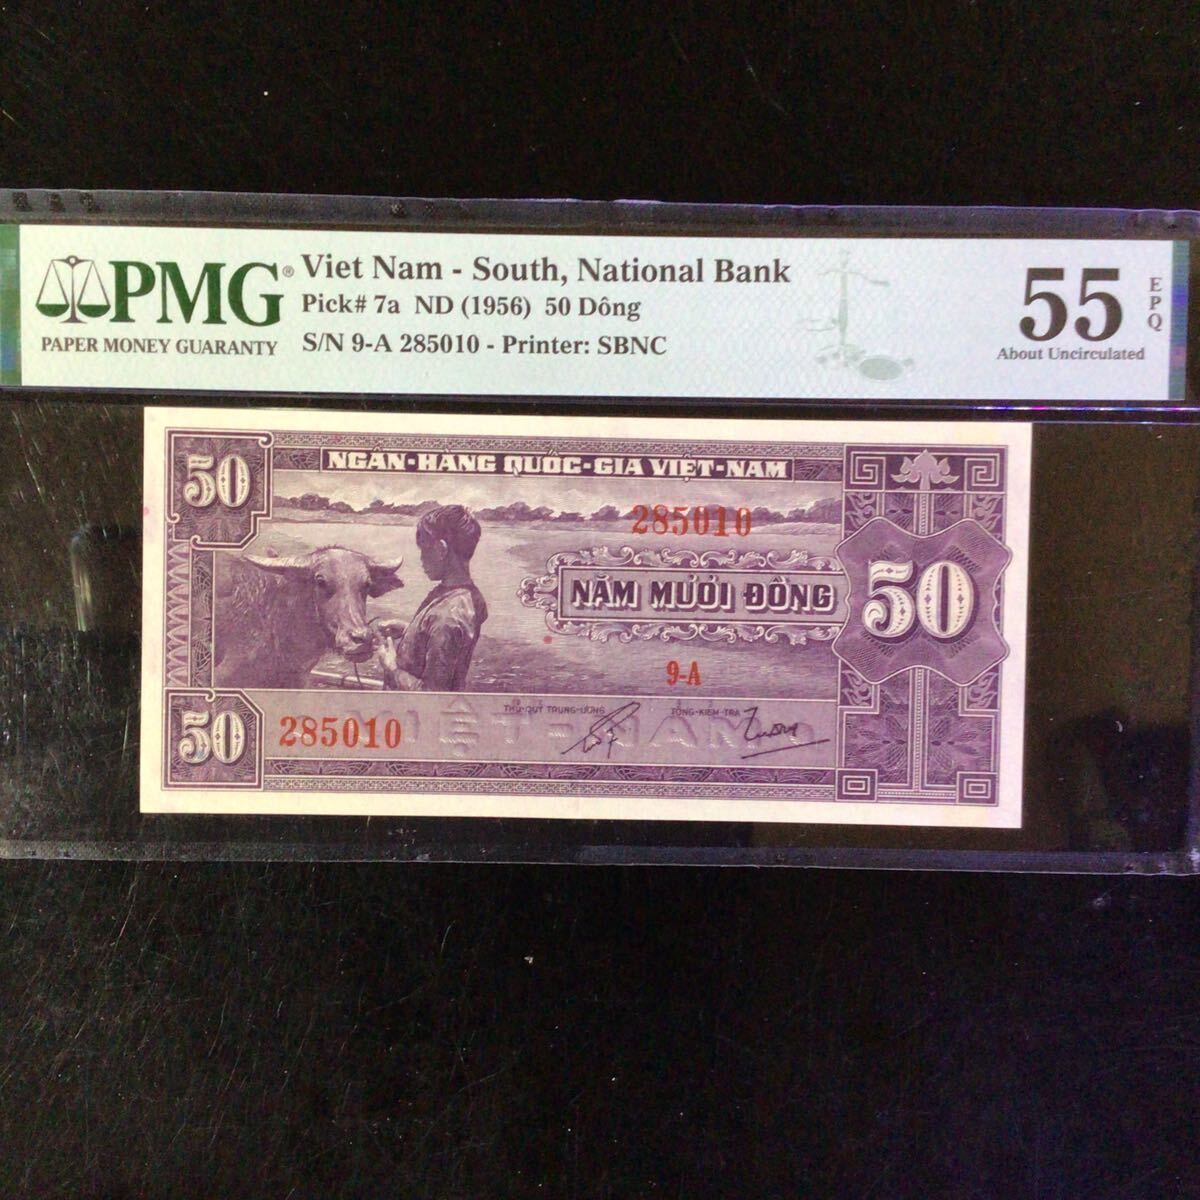 World Banknote Grading SOUTH VIET NAM《National Bank》50 Dong【1956】『PMG Grading About Uncirculated 55 EPQ』_画像1